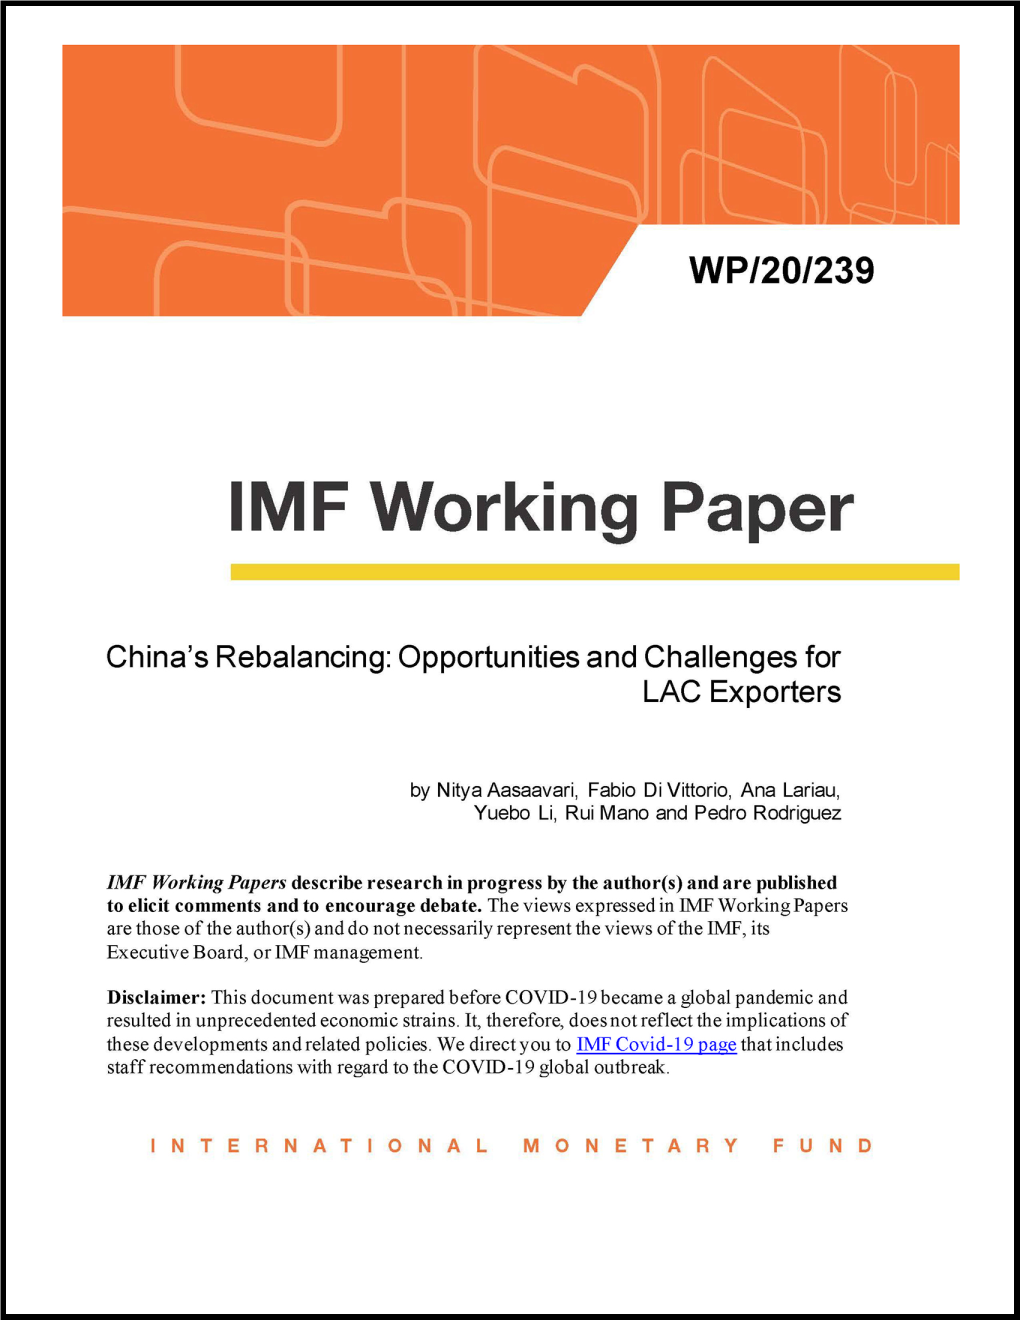 China's Rebalancing: Opportunities and Challenges for LAC Exporters